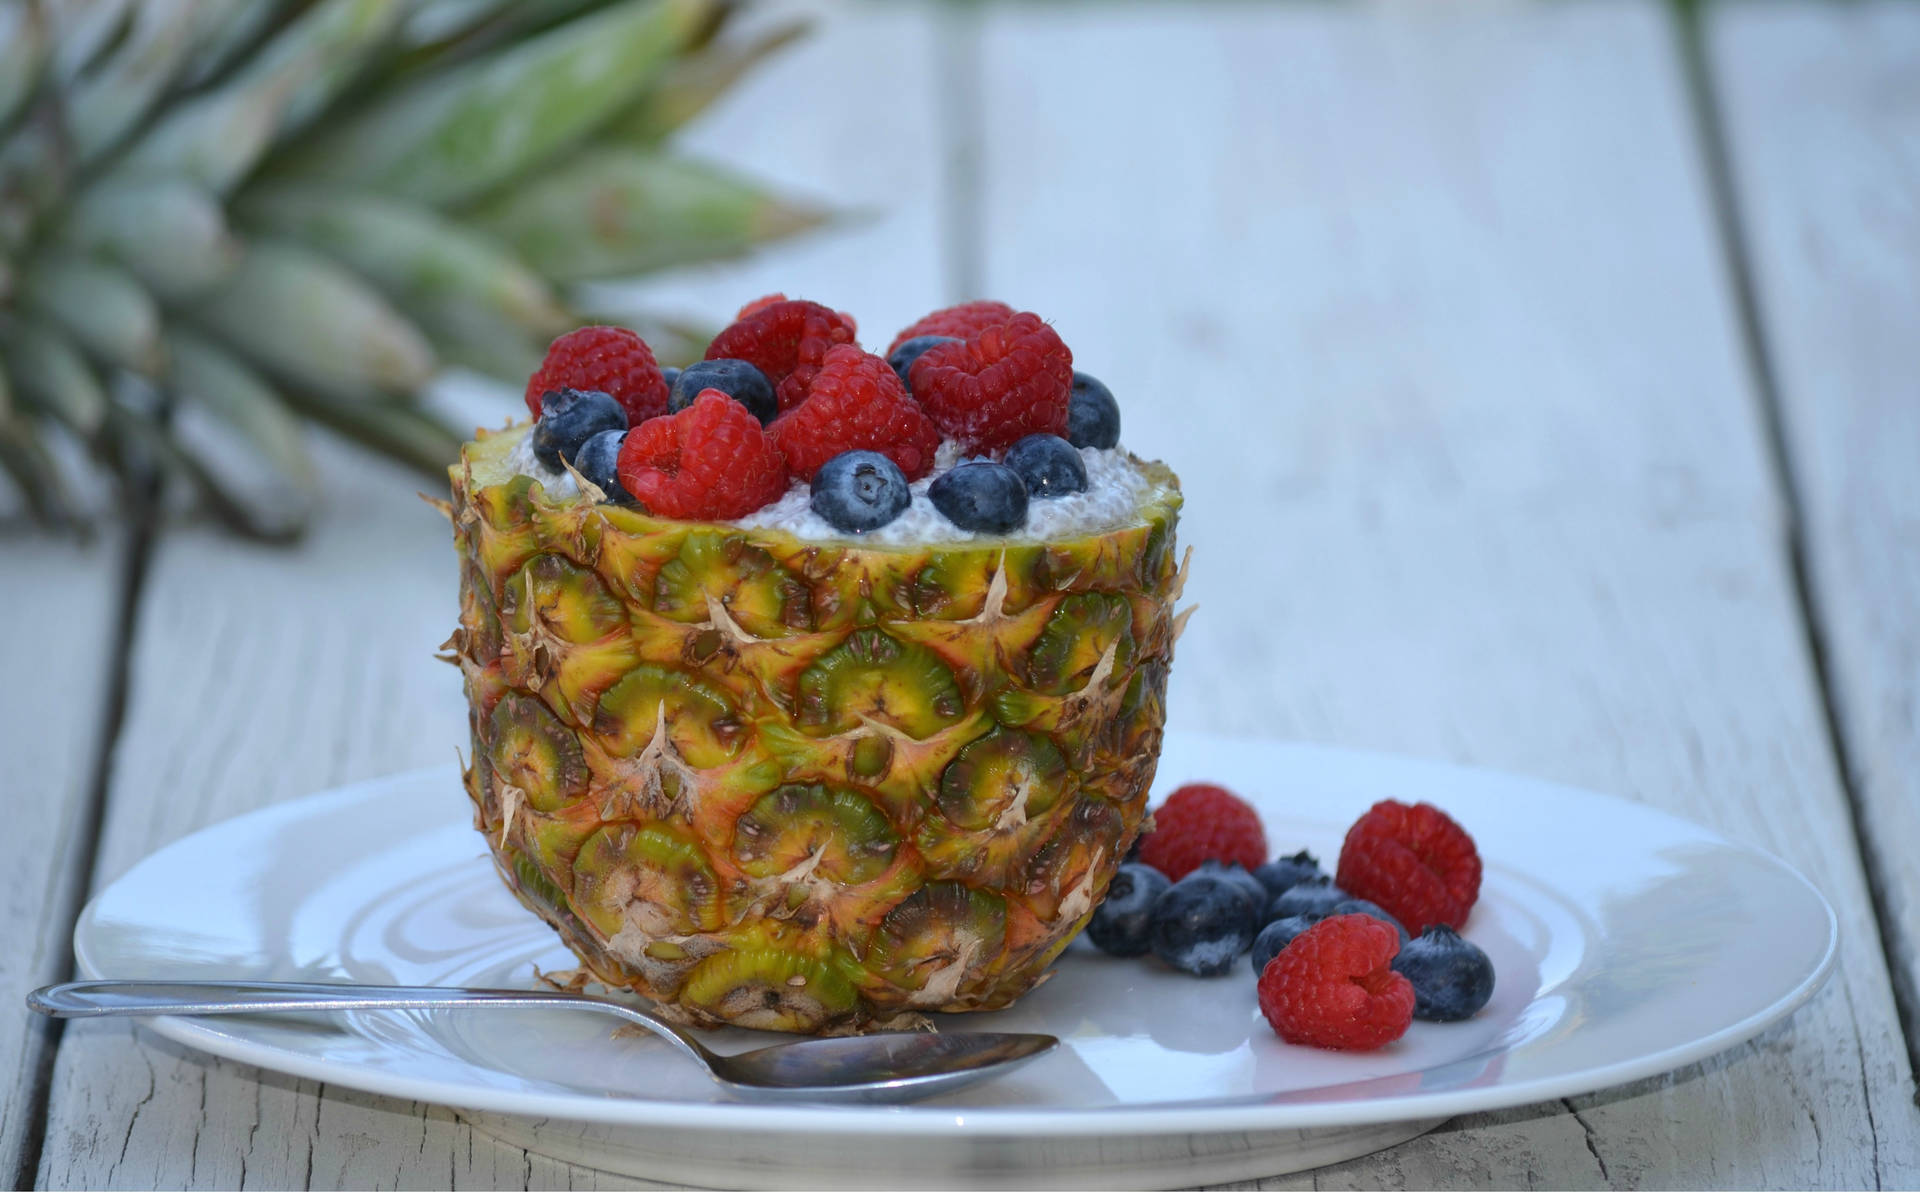 Sweet and juicy pineapples topped with fresh berries Wallpaper